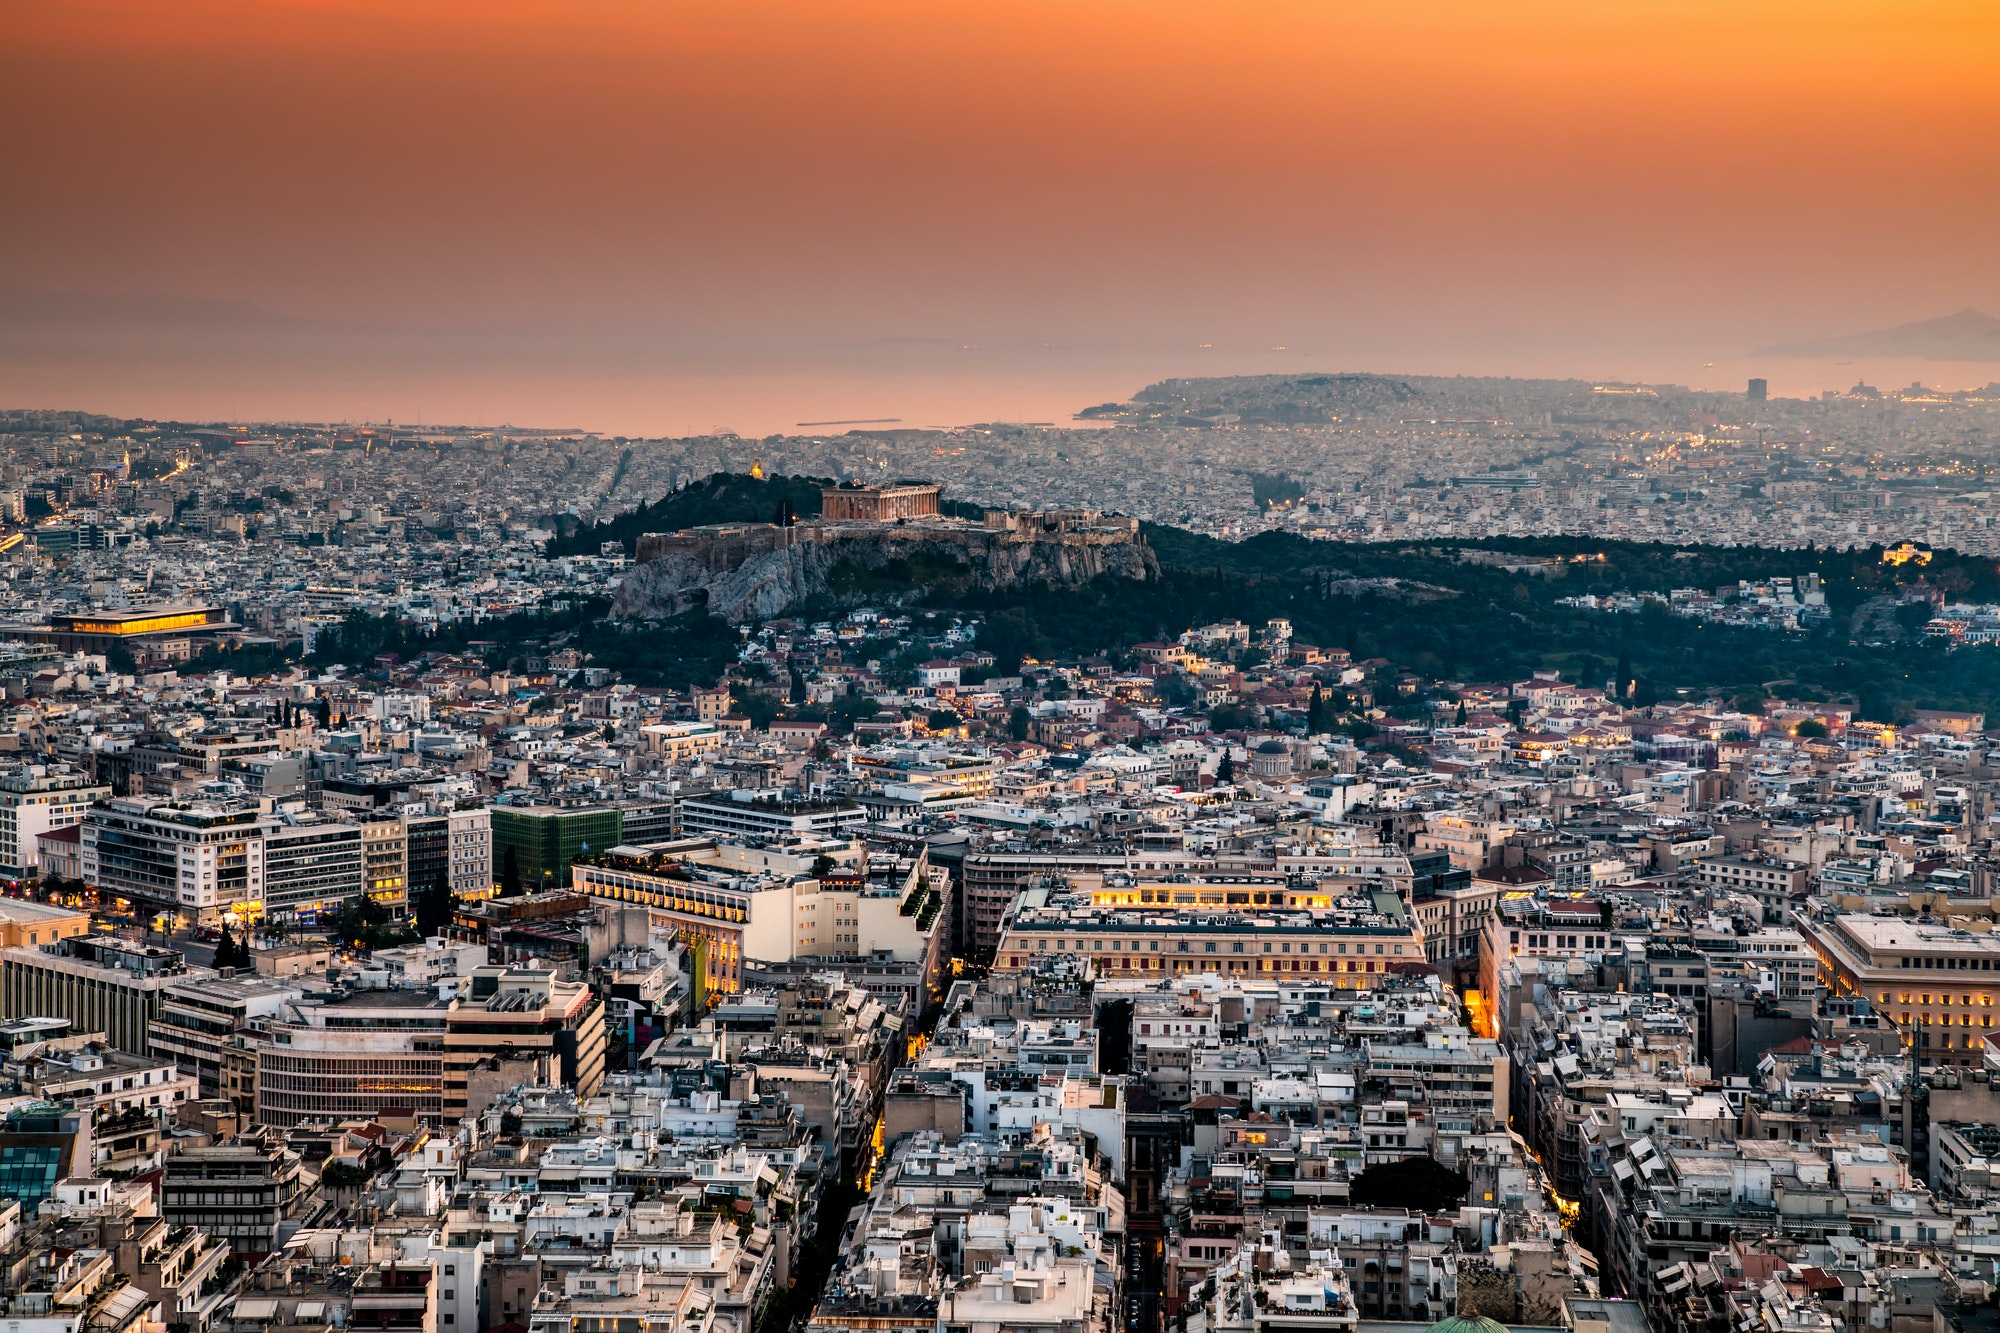 Scenic panoramic view on Acropolis in Athens, Greece at sunset.